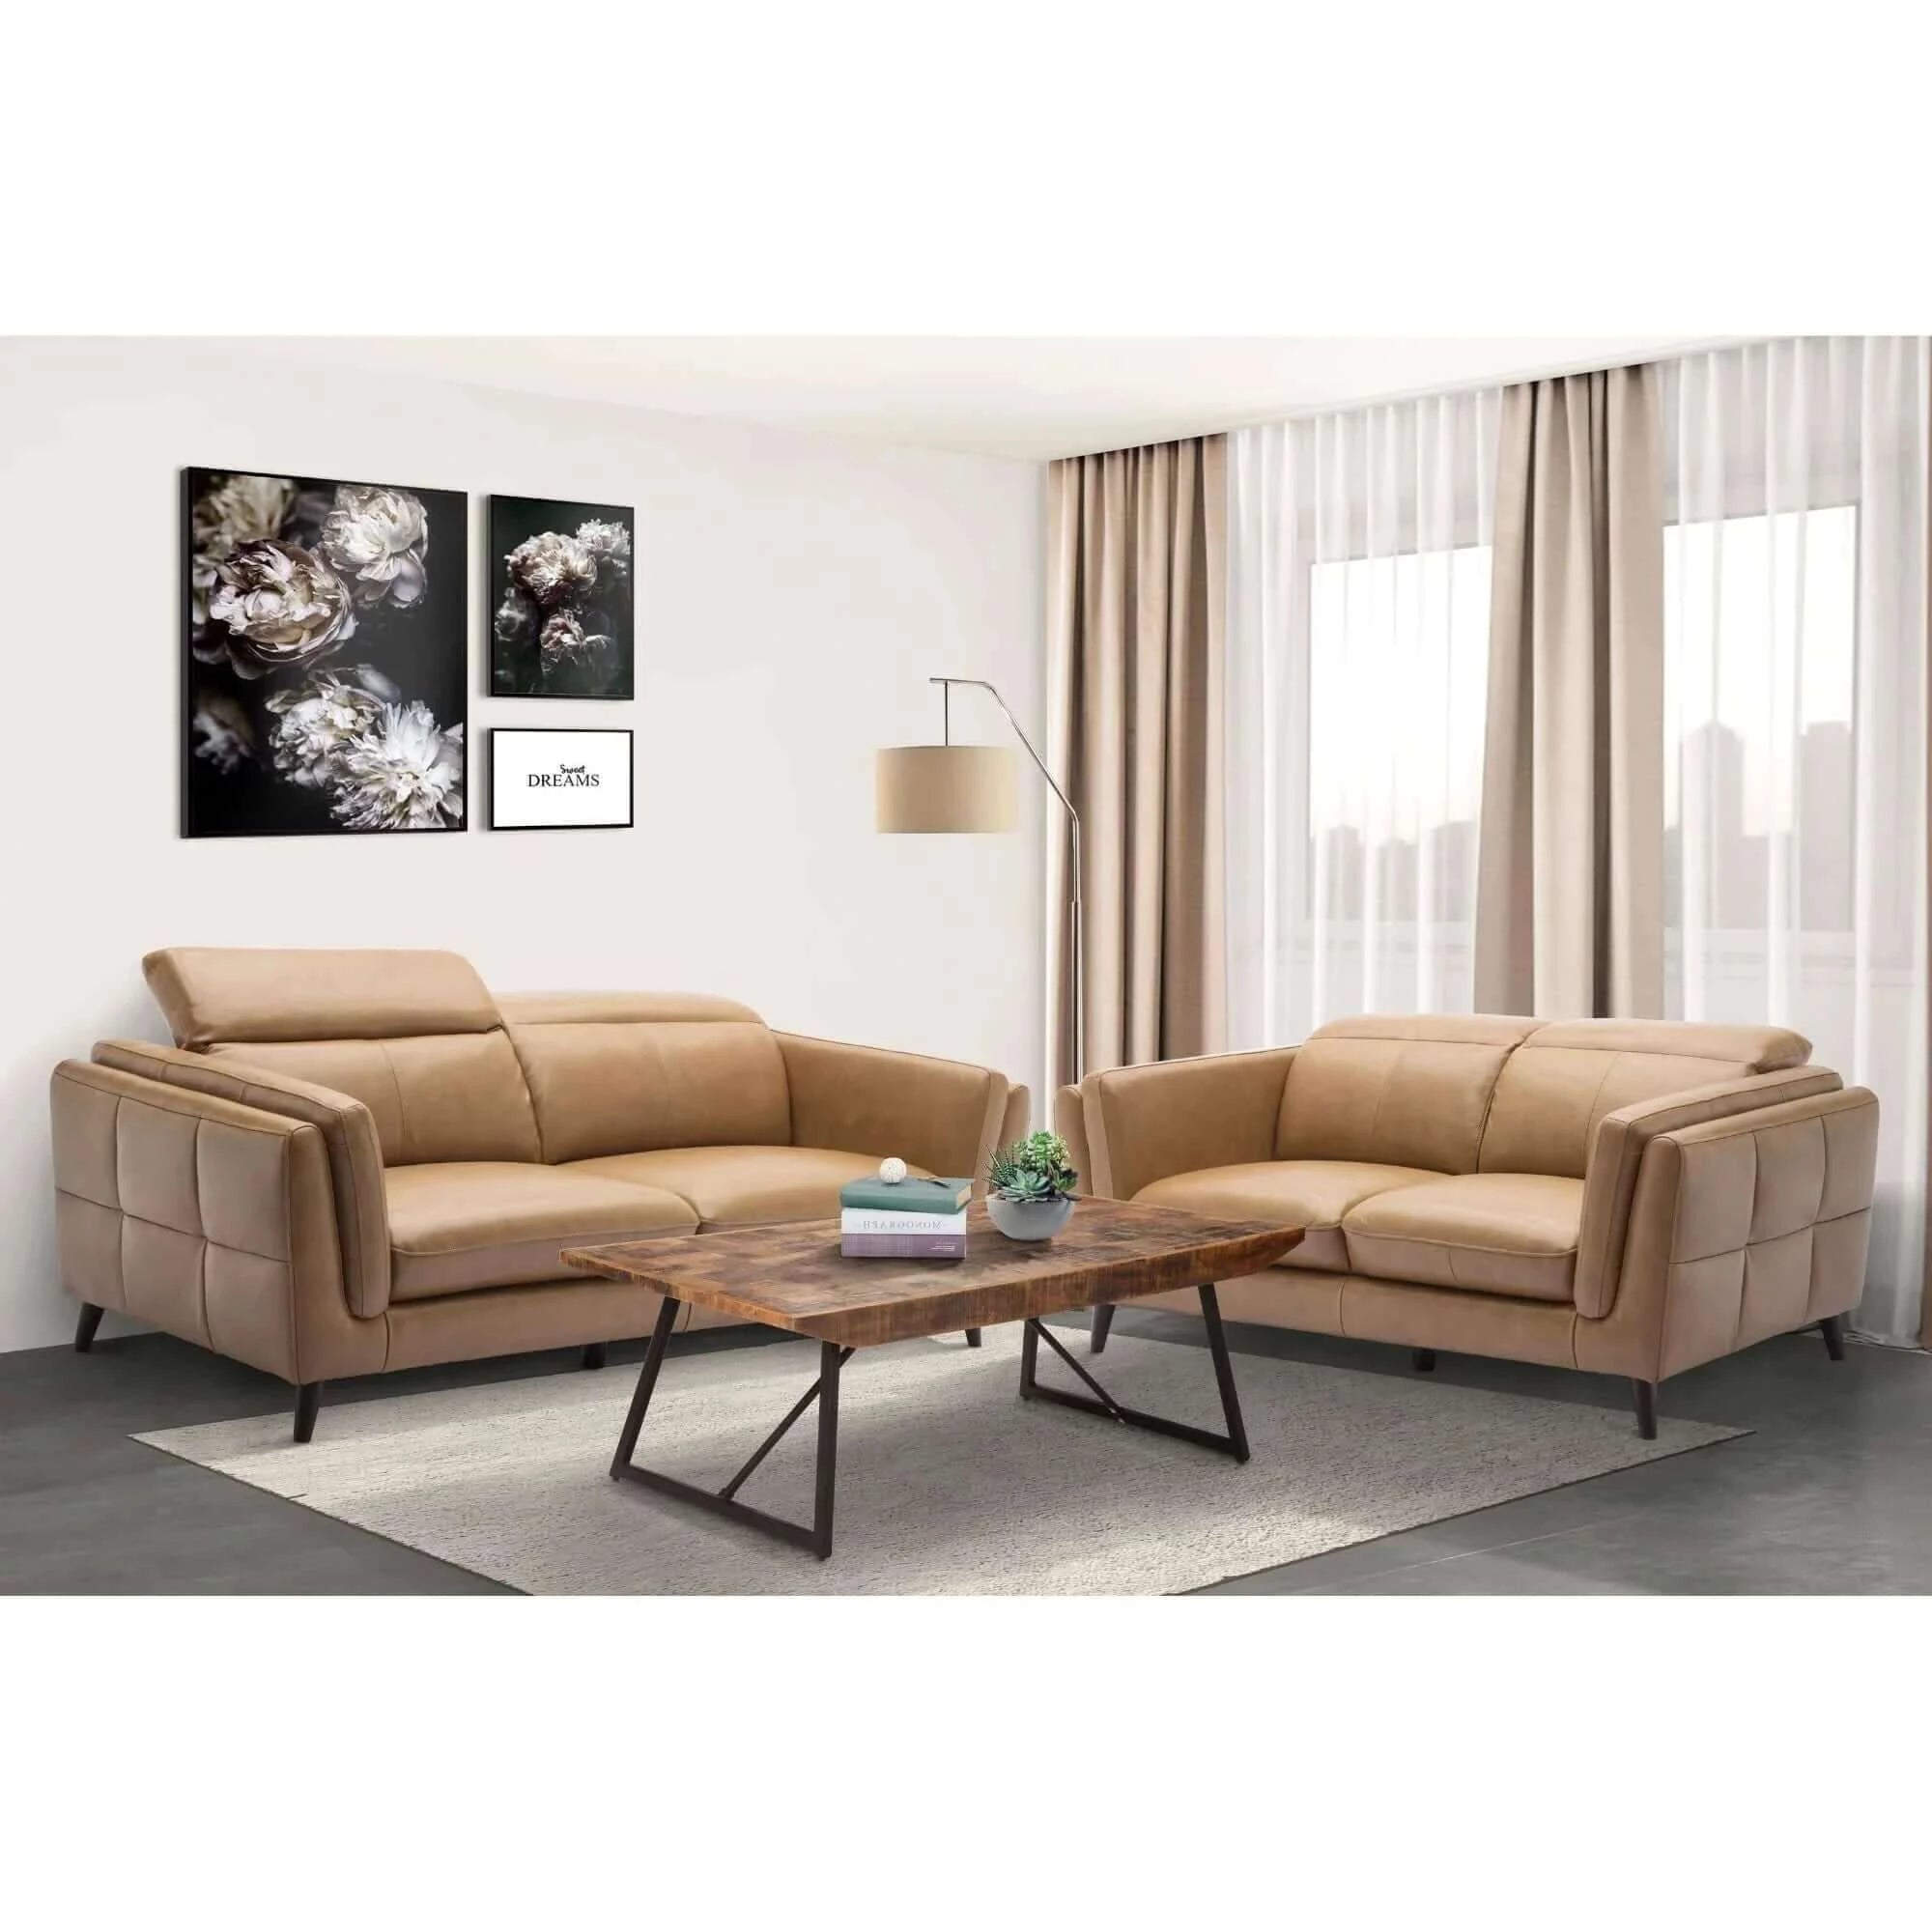 Buy Quince 2 Seater Sofa Genuine Leather Upholstered Coach Lounge-Upinteriors